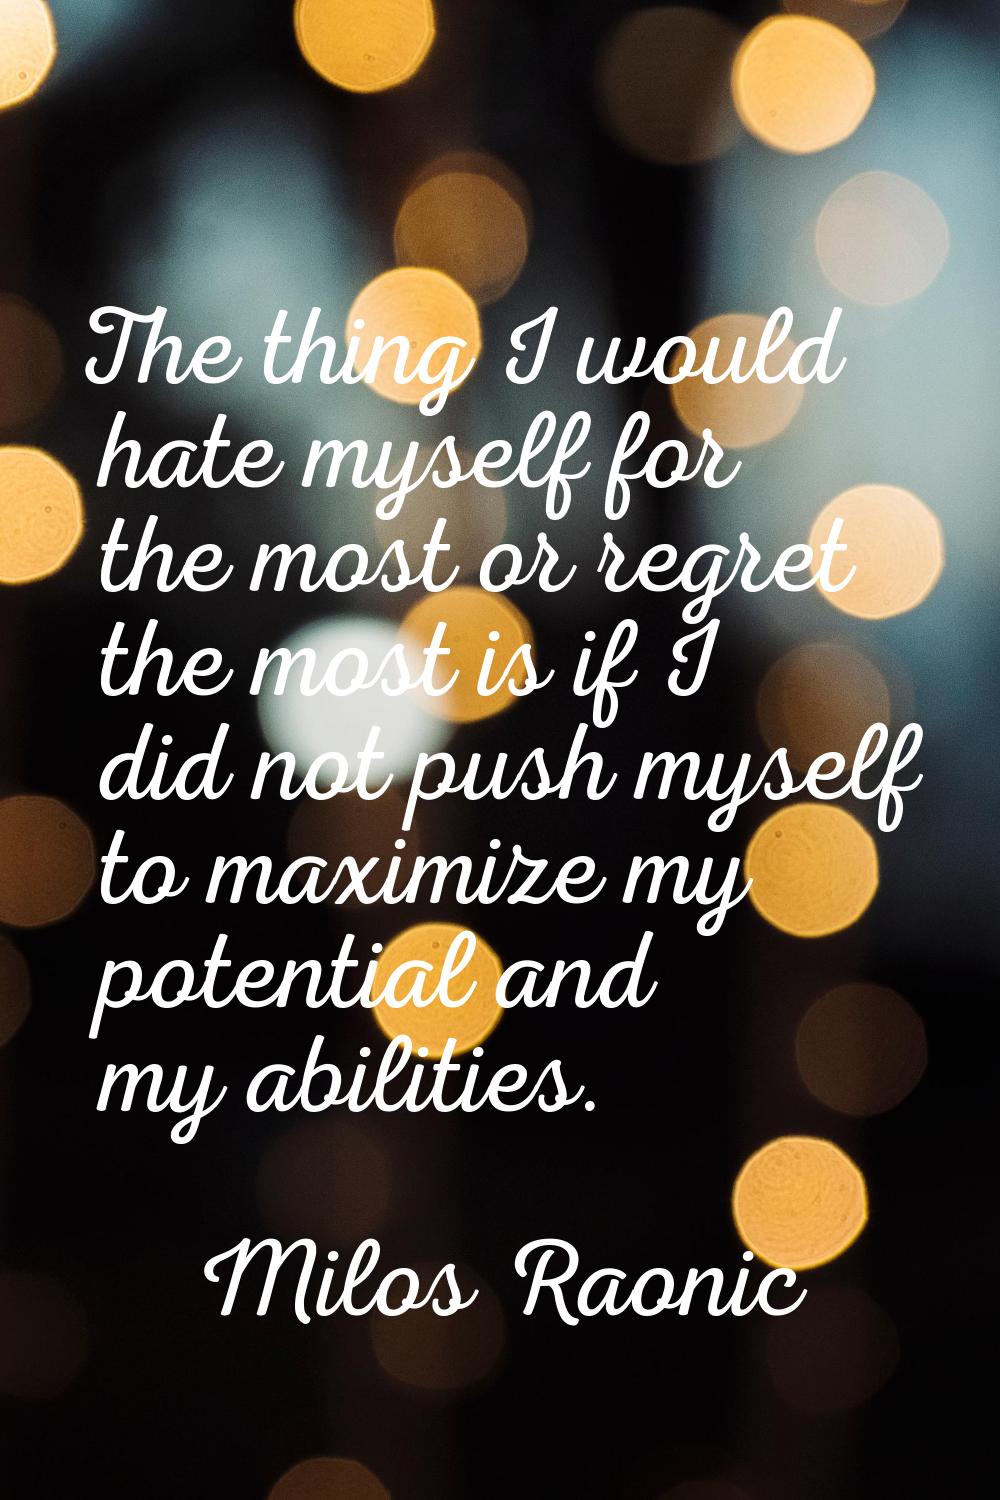 The thing I would hate myself for the most or regret the most is if I did not push myself to maximi